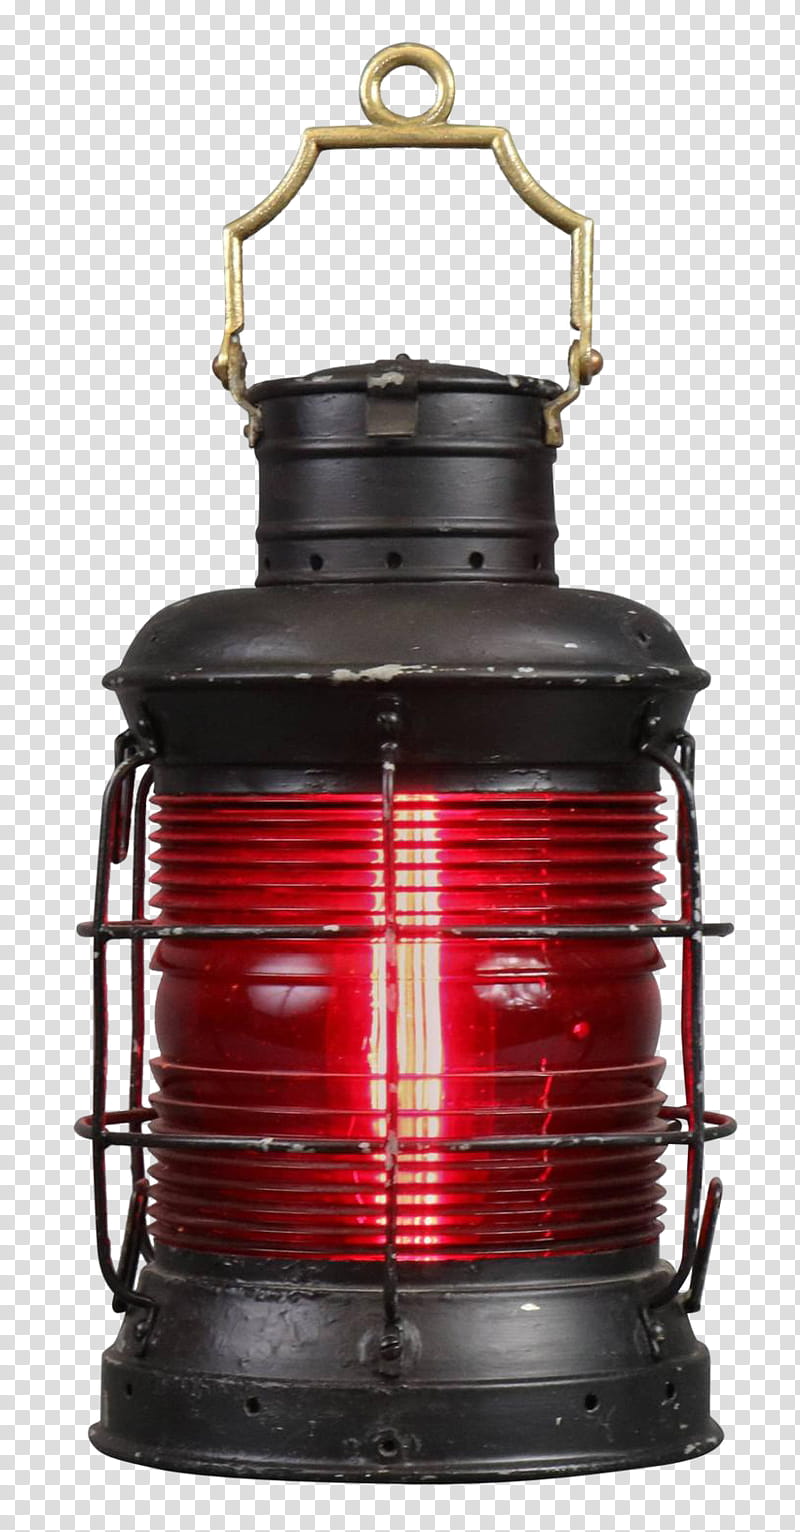 Lanterns, red and black space heater transparent background PNG clipart